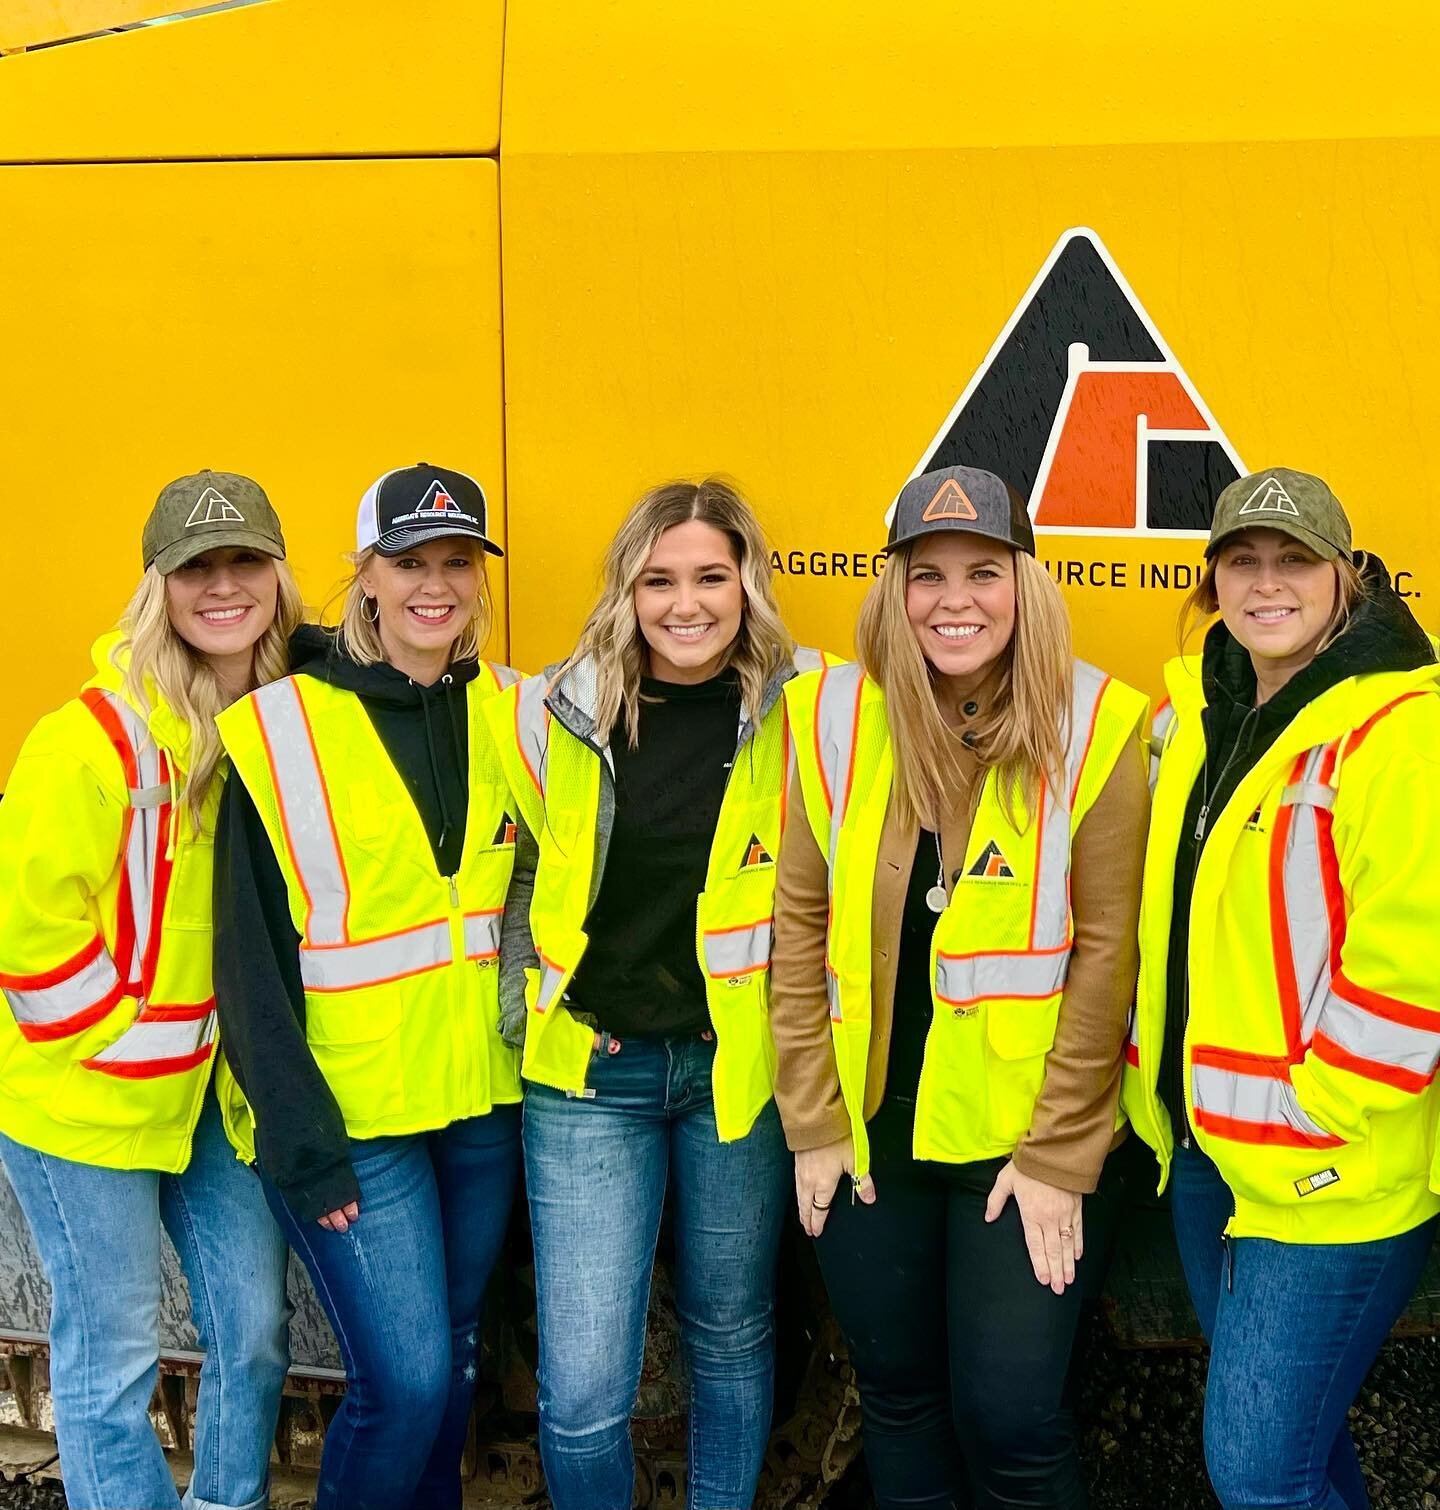 It is Women in Construction Week and International Women&rsquo;s Day! A special shout-out to the amazing women that work for ARI! Thank you for all you do and for keeping ARI ROCKIN&rsquo;! 

#womeninconstructionweek #internationalwomensday 
#womenin